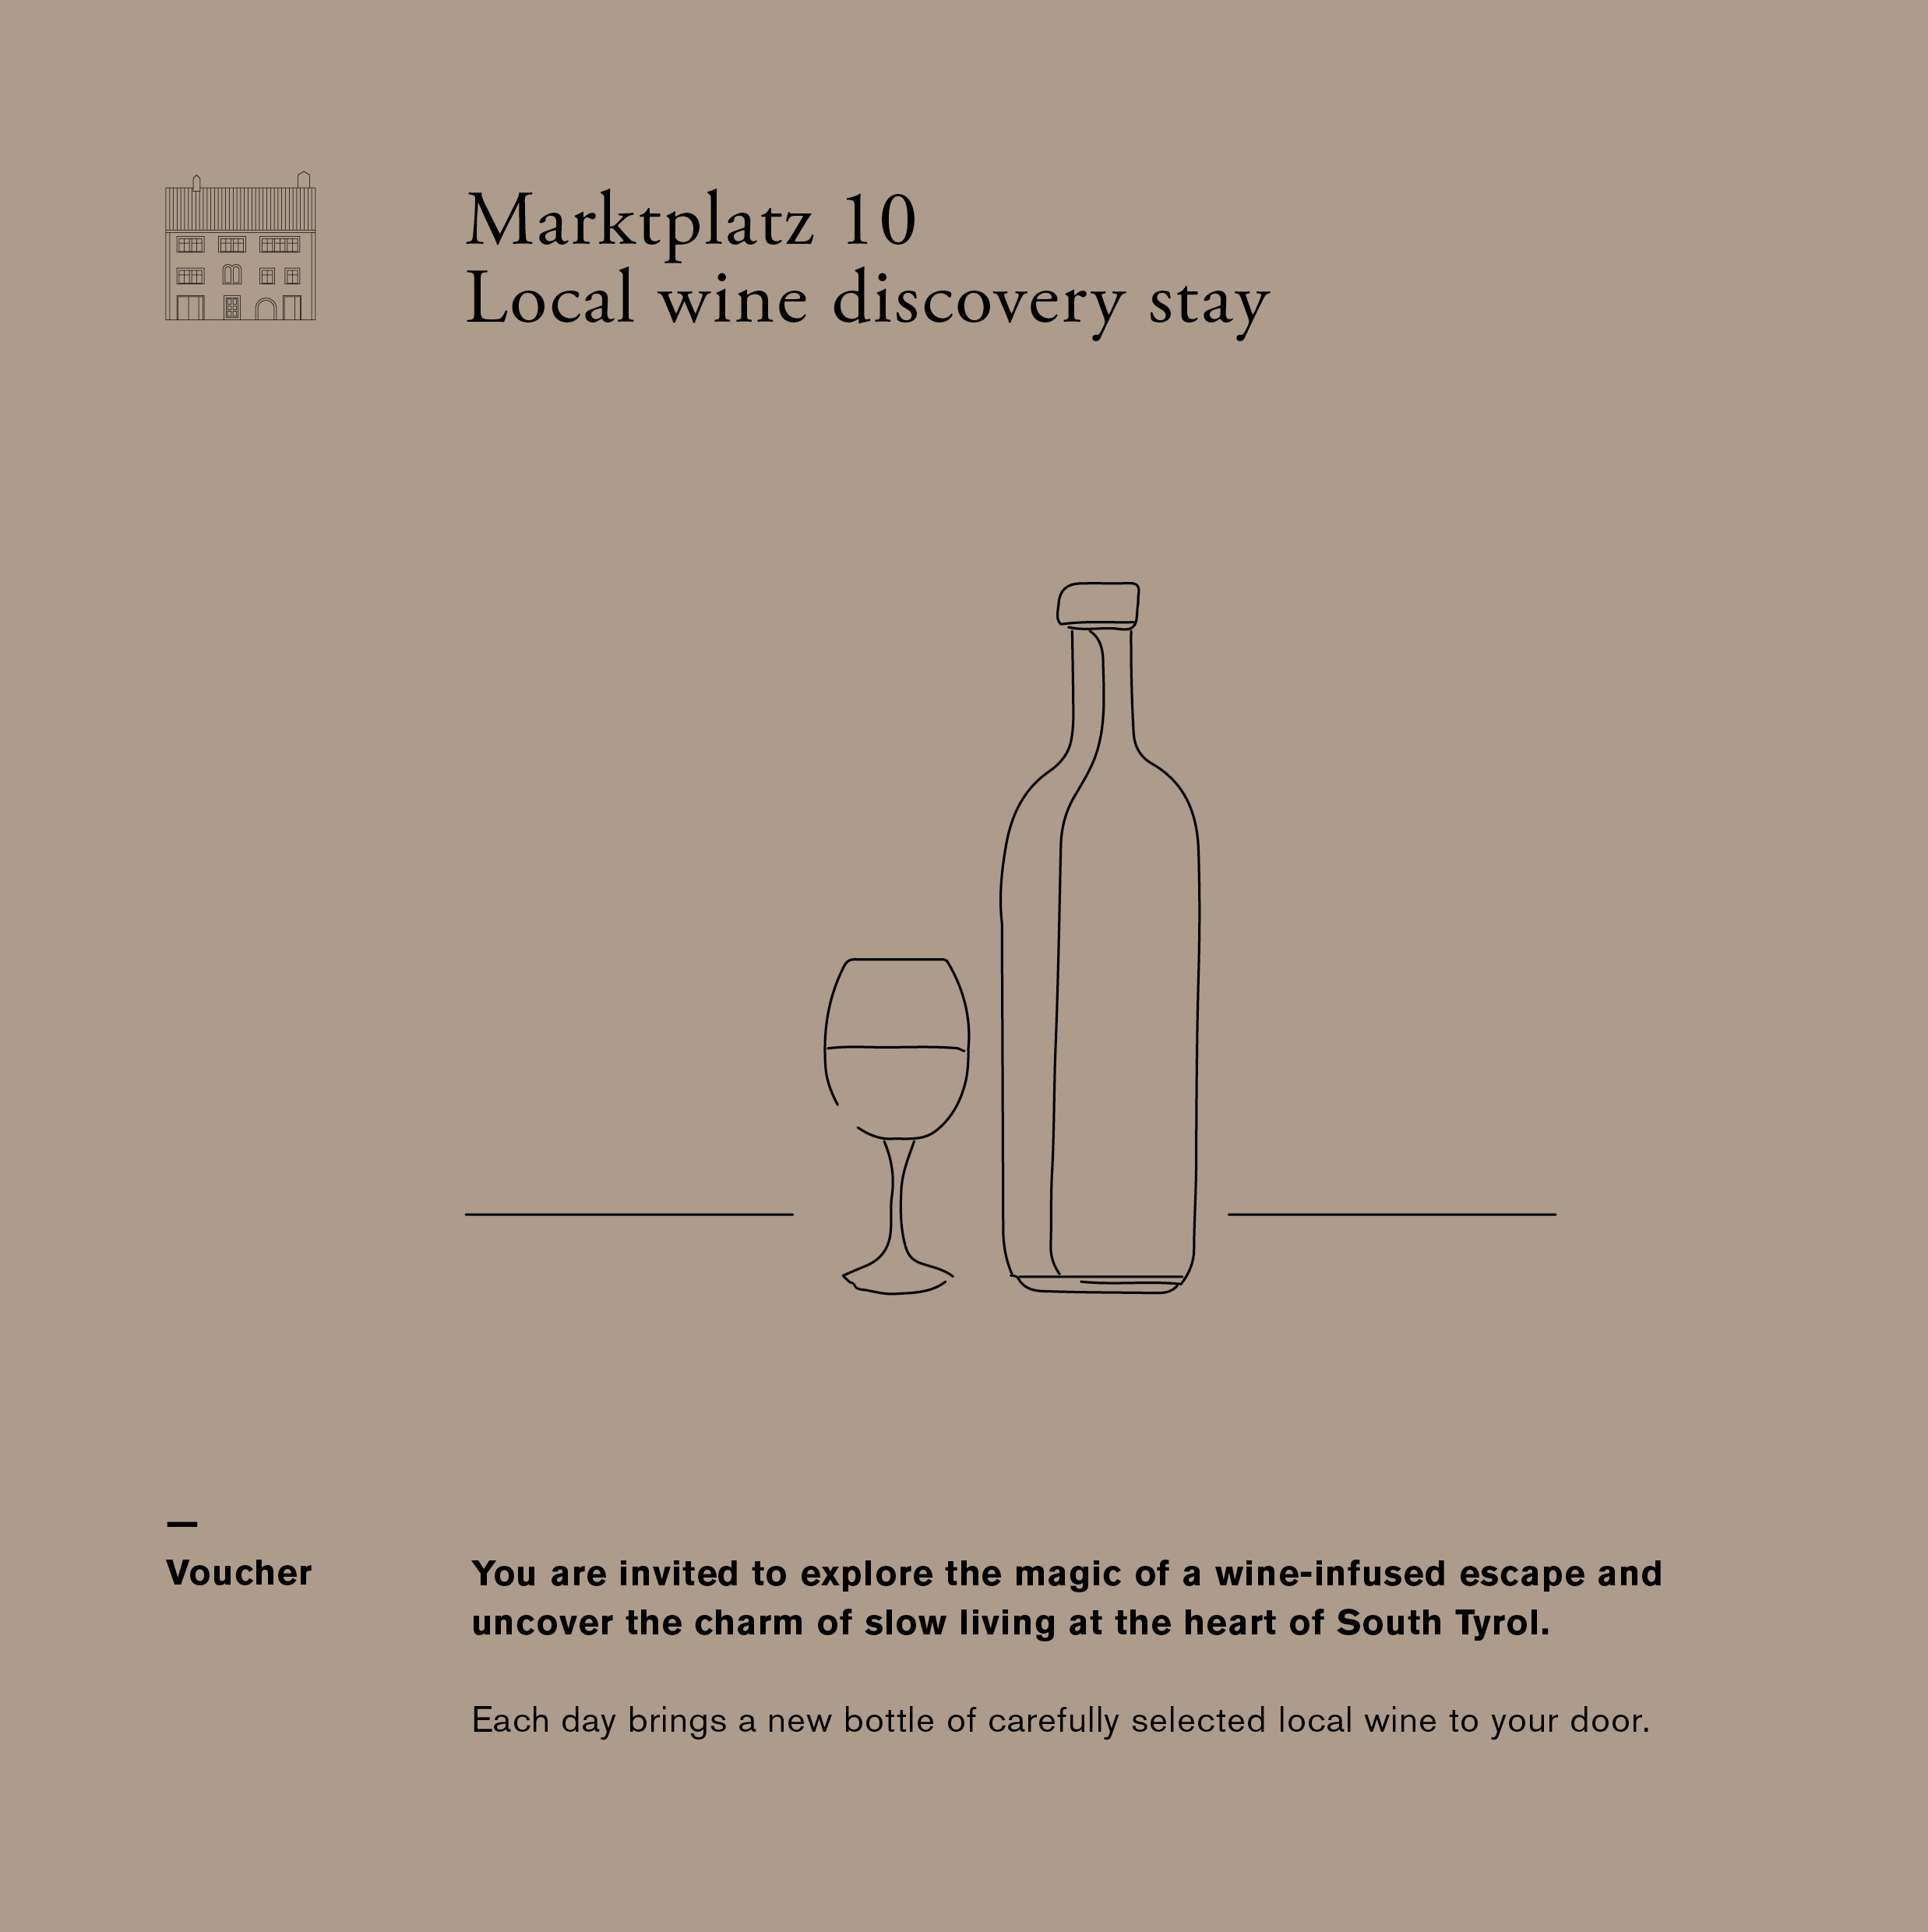 wine discovery hotel stay gift voucher